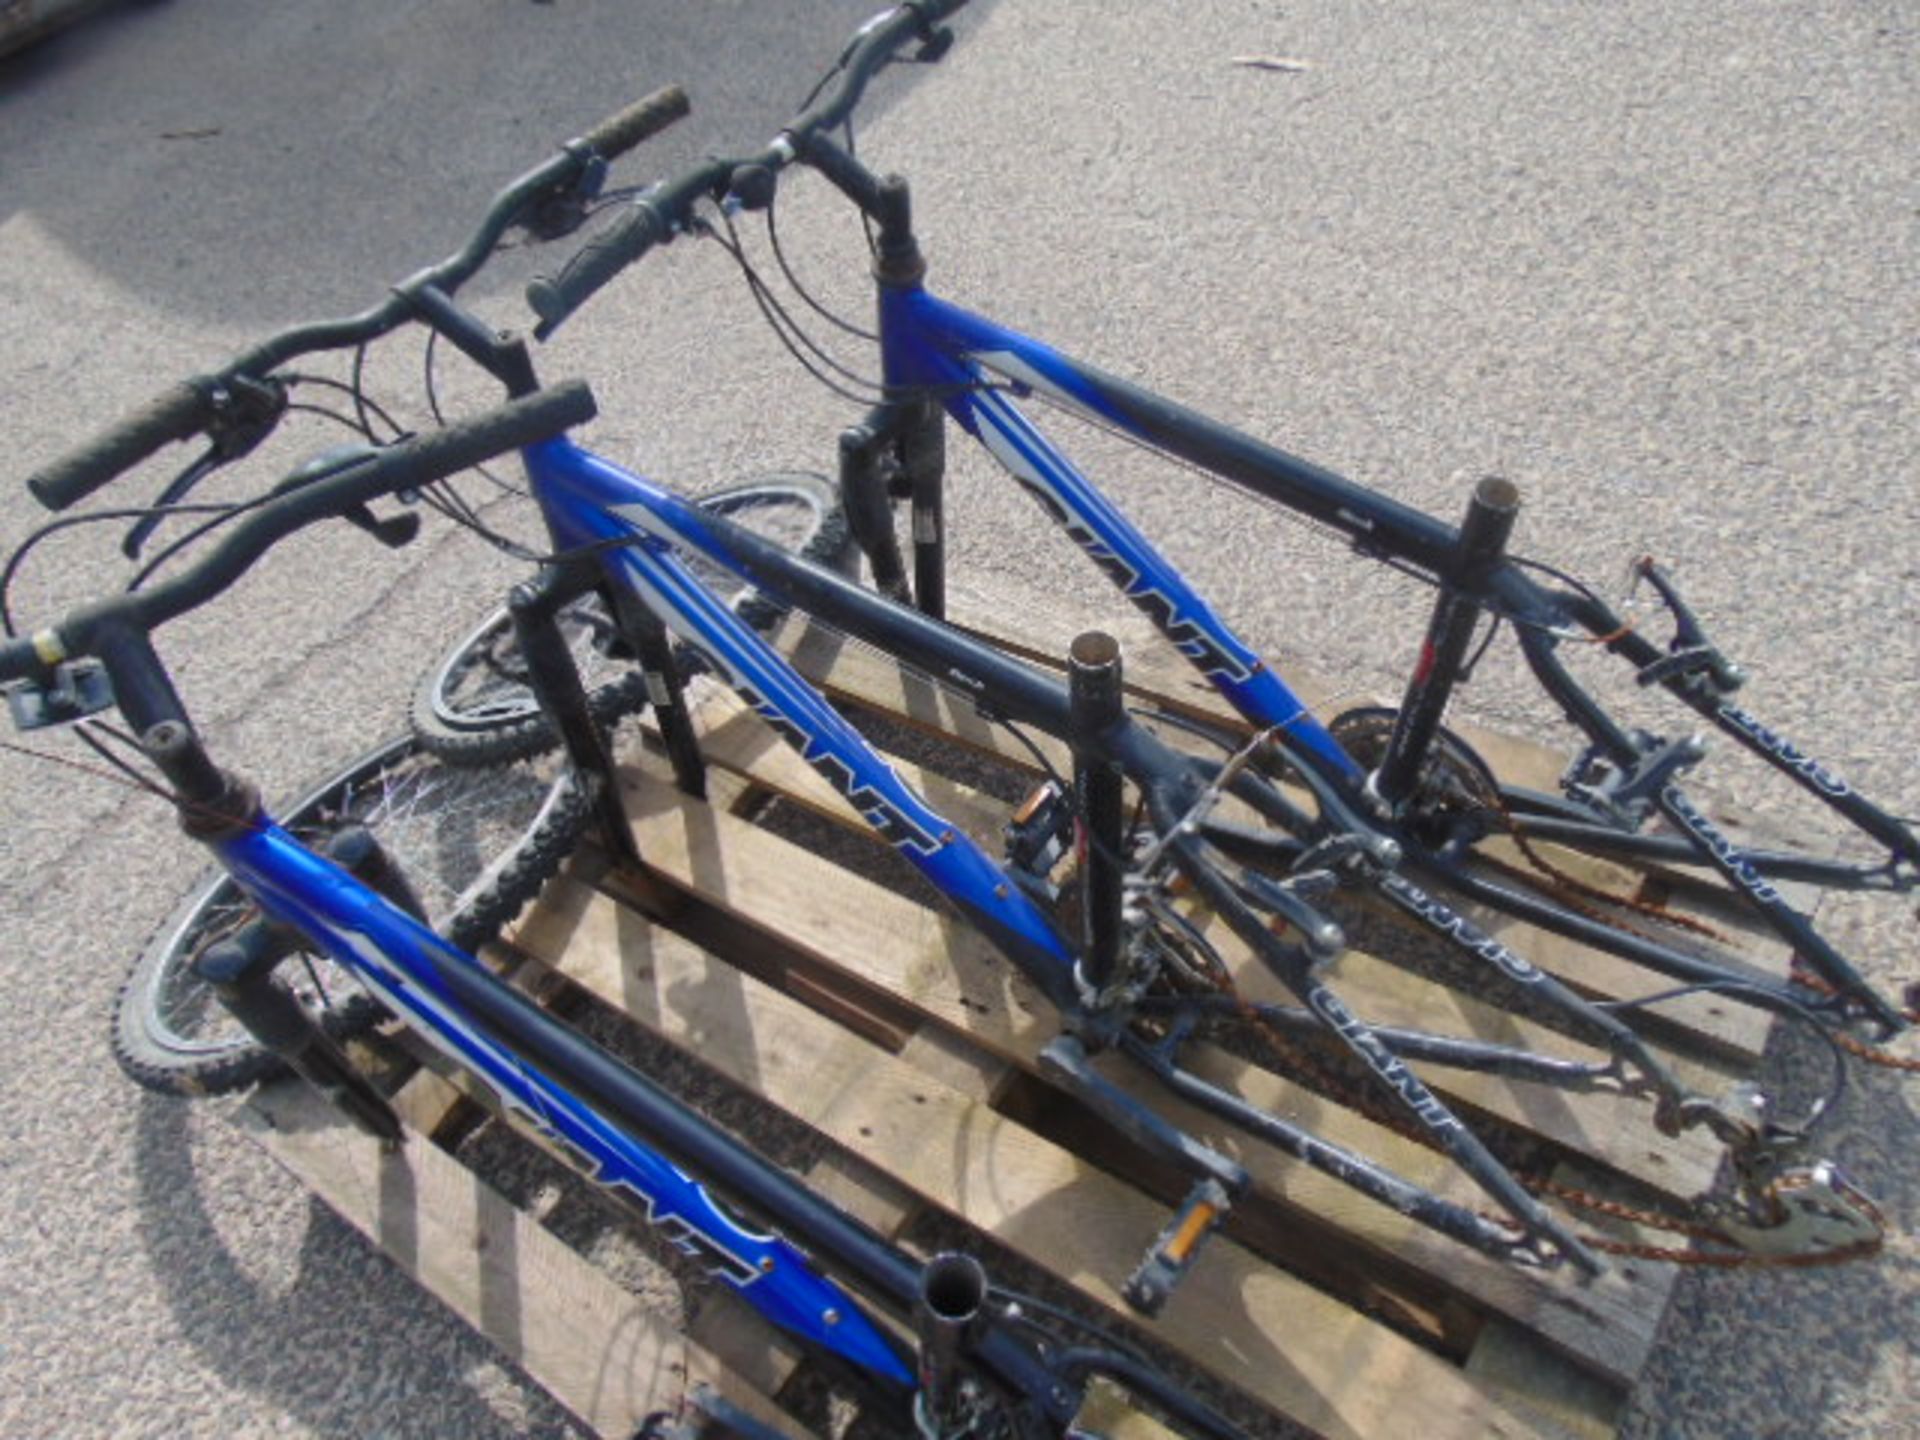 3 x Giant Alluxx 6000 Series Bike Frames with Forks, 2 x wheels etc - Image 3 of 9